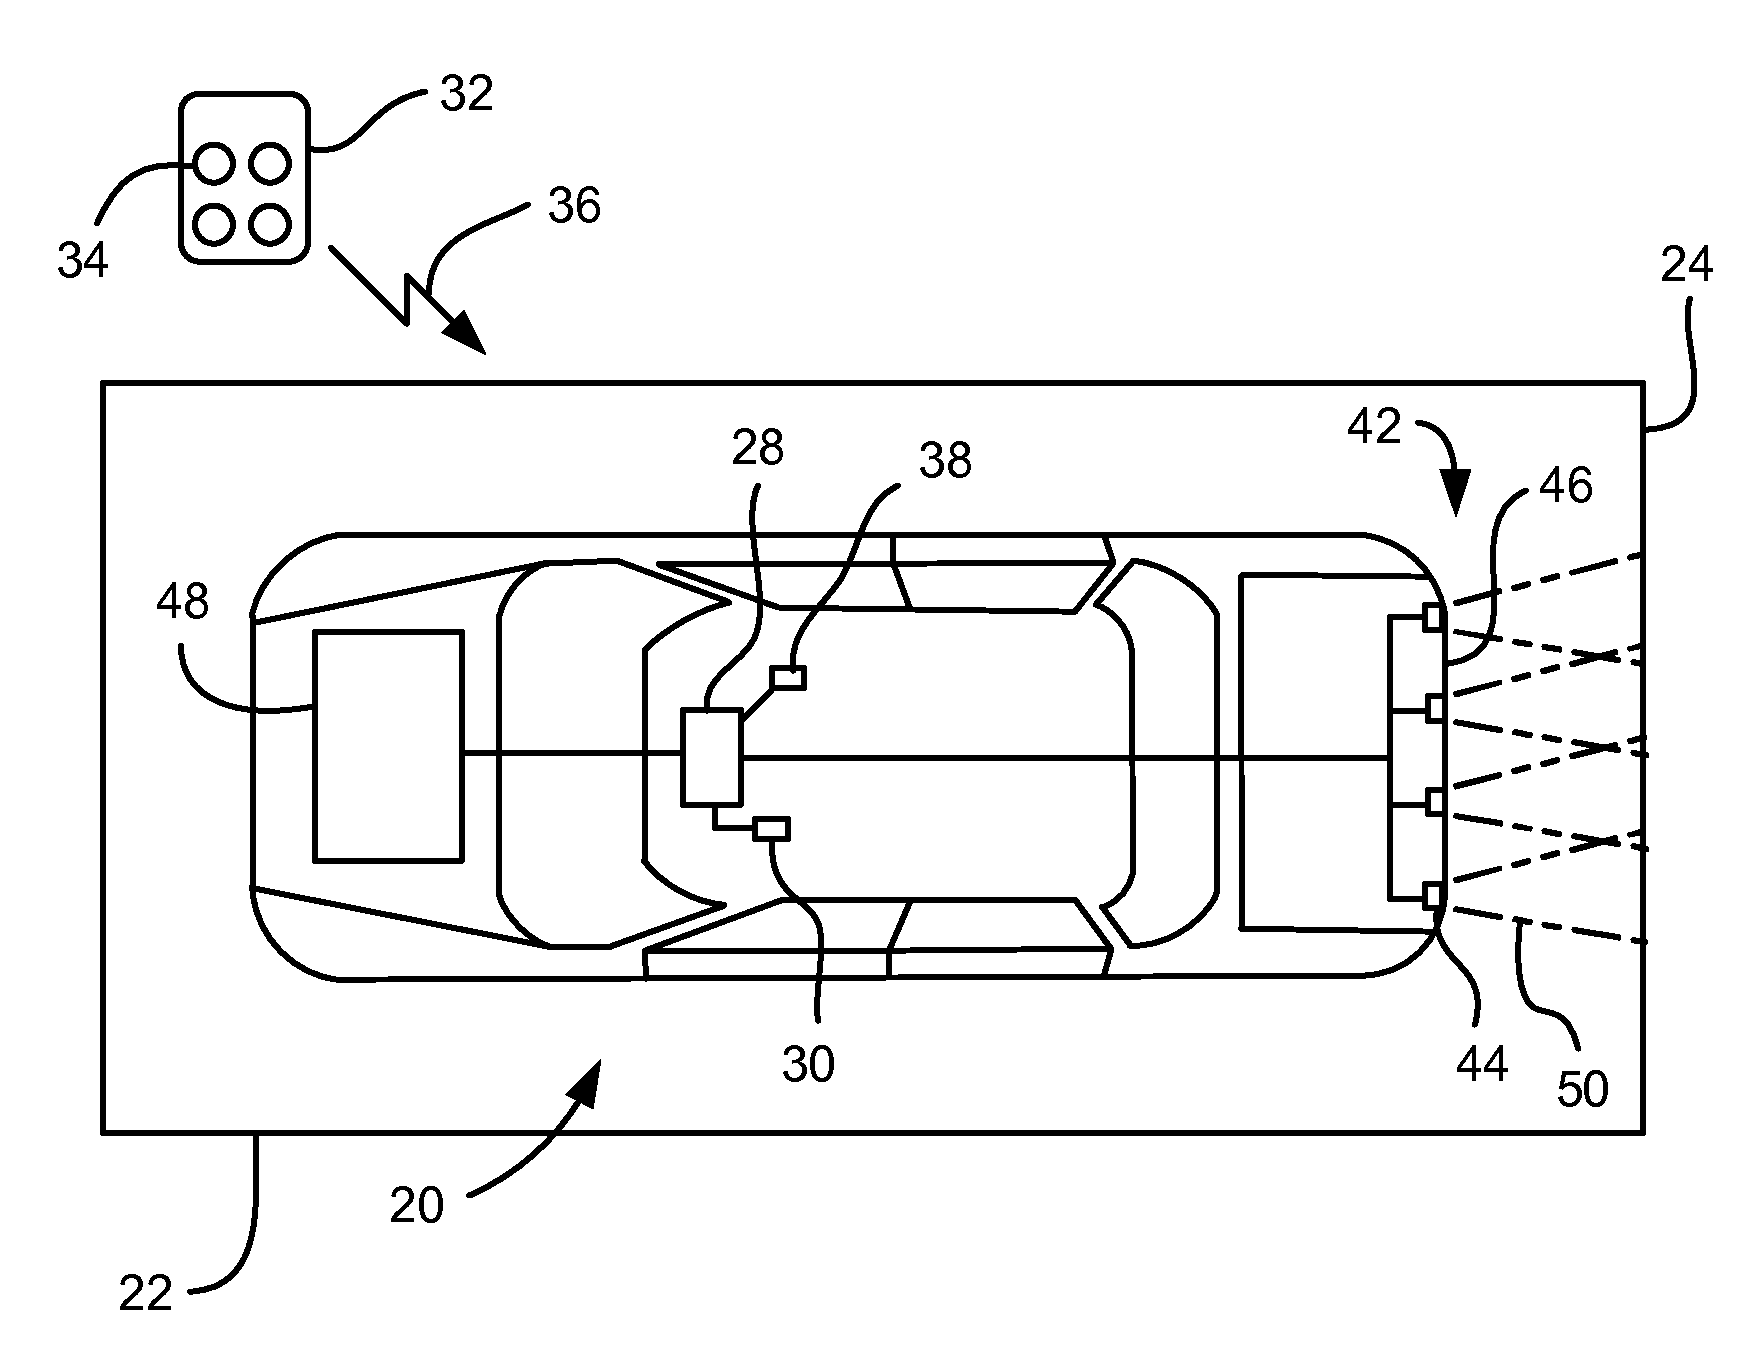 Vehicle Having Remote Start and Enclosed Space Detection